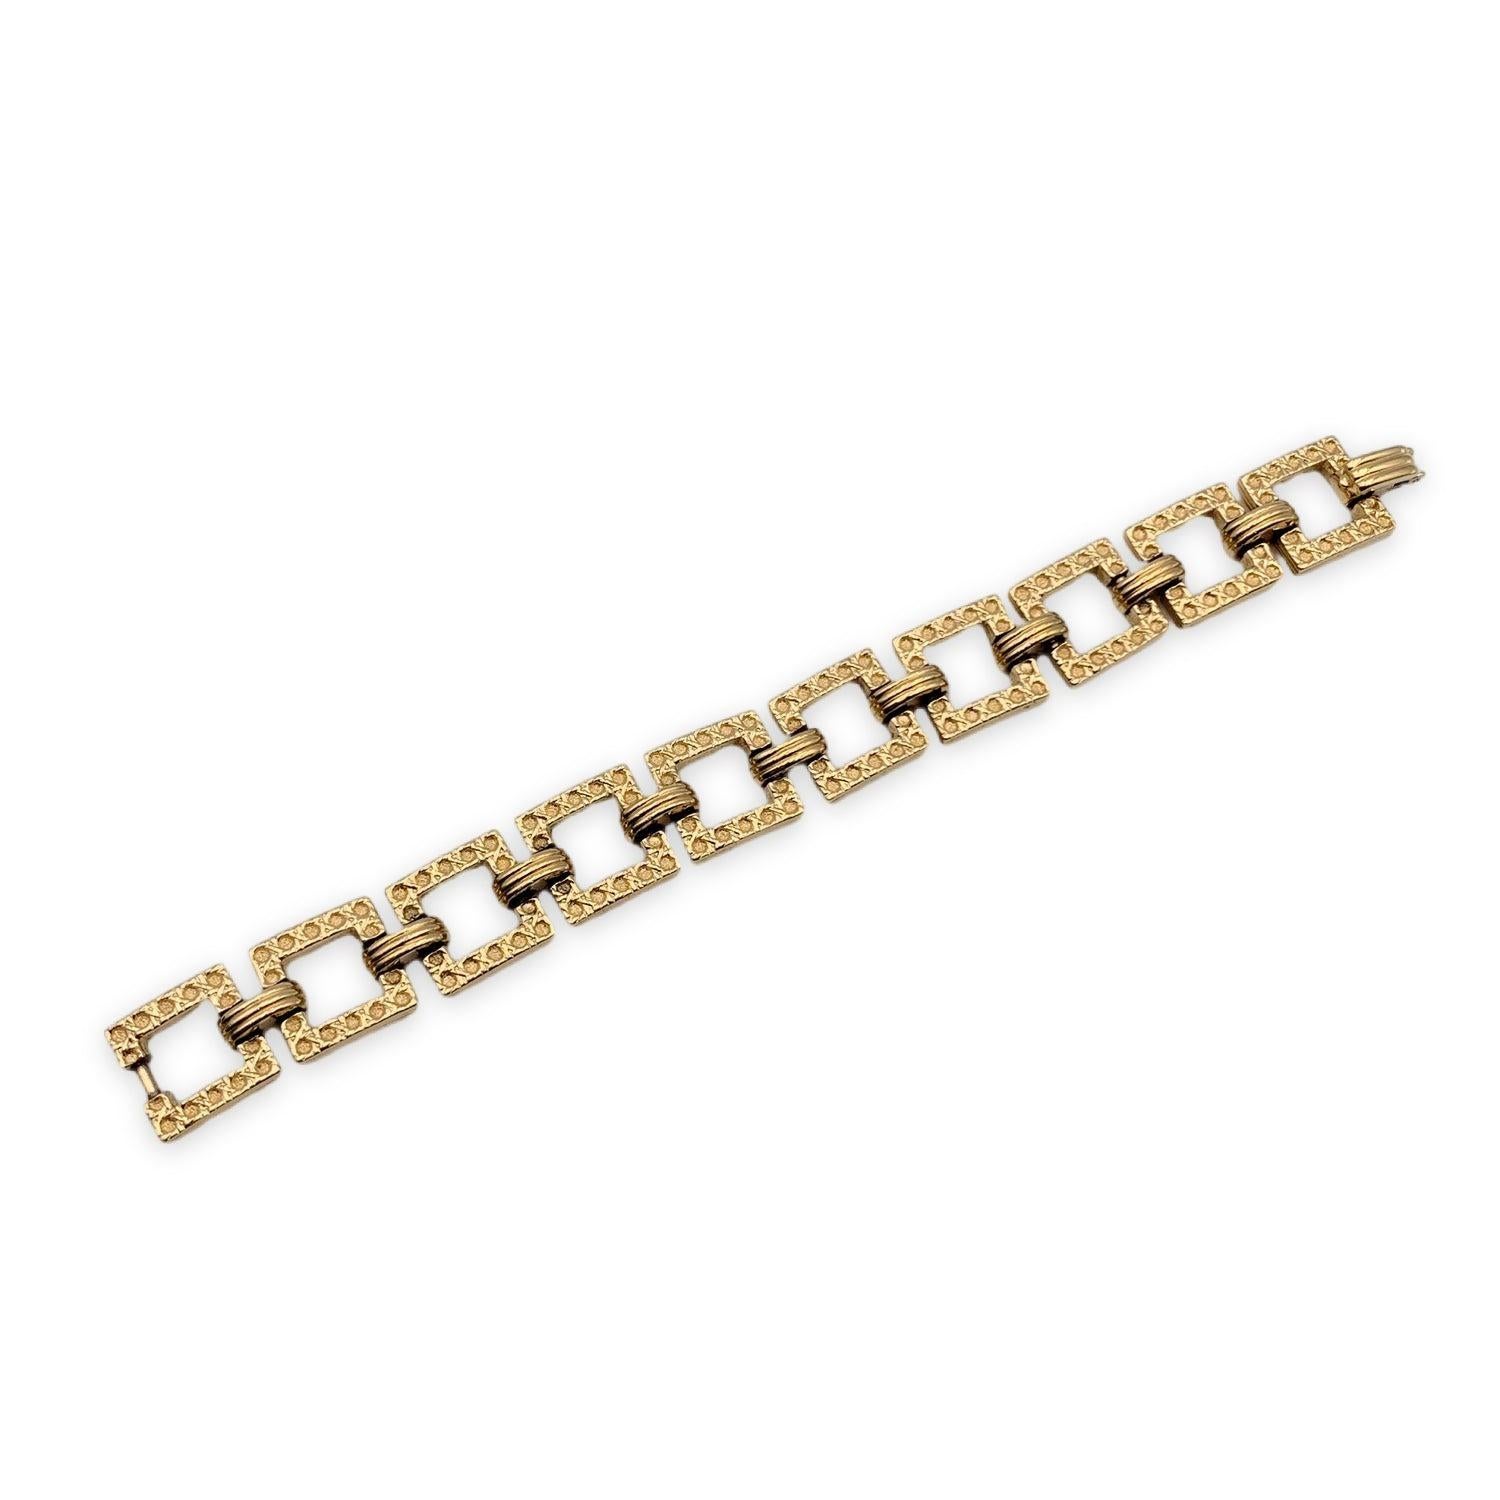 Gold metal articulated vintage bracelet by CHRISTIAN DIOR. Square links. Internal circumference: 7 inches - 17.8 cm. 'Dior' signature engraved on the reverse of the bracelet. Condition A - EXCELLENT Gently used. Please check pictures carefully and